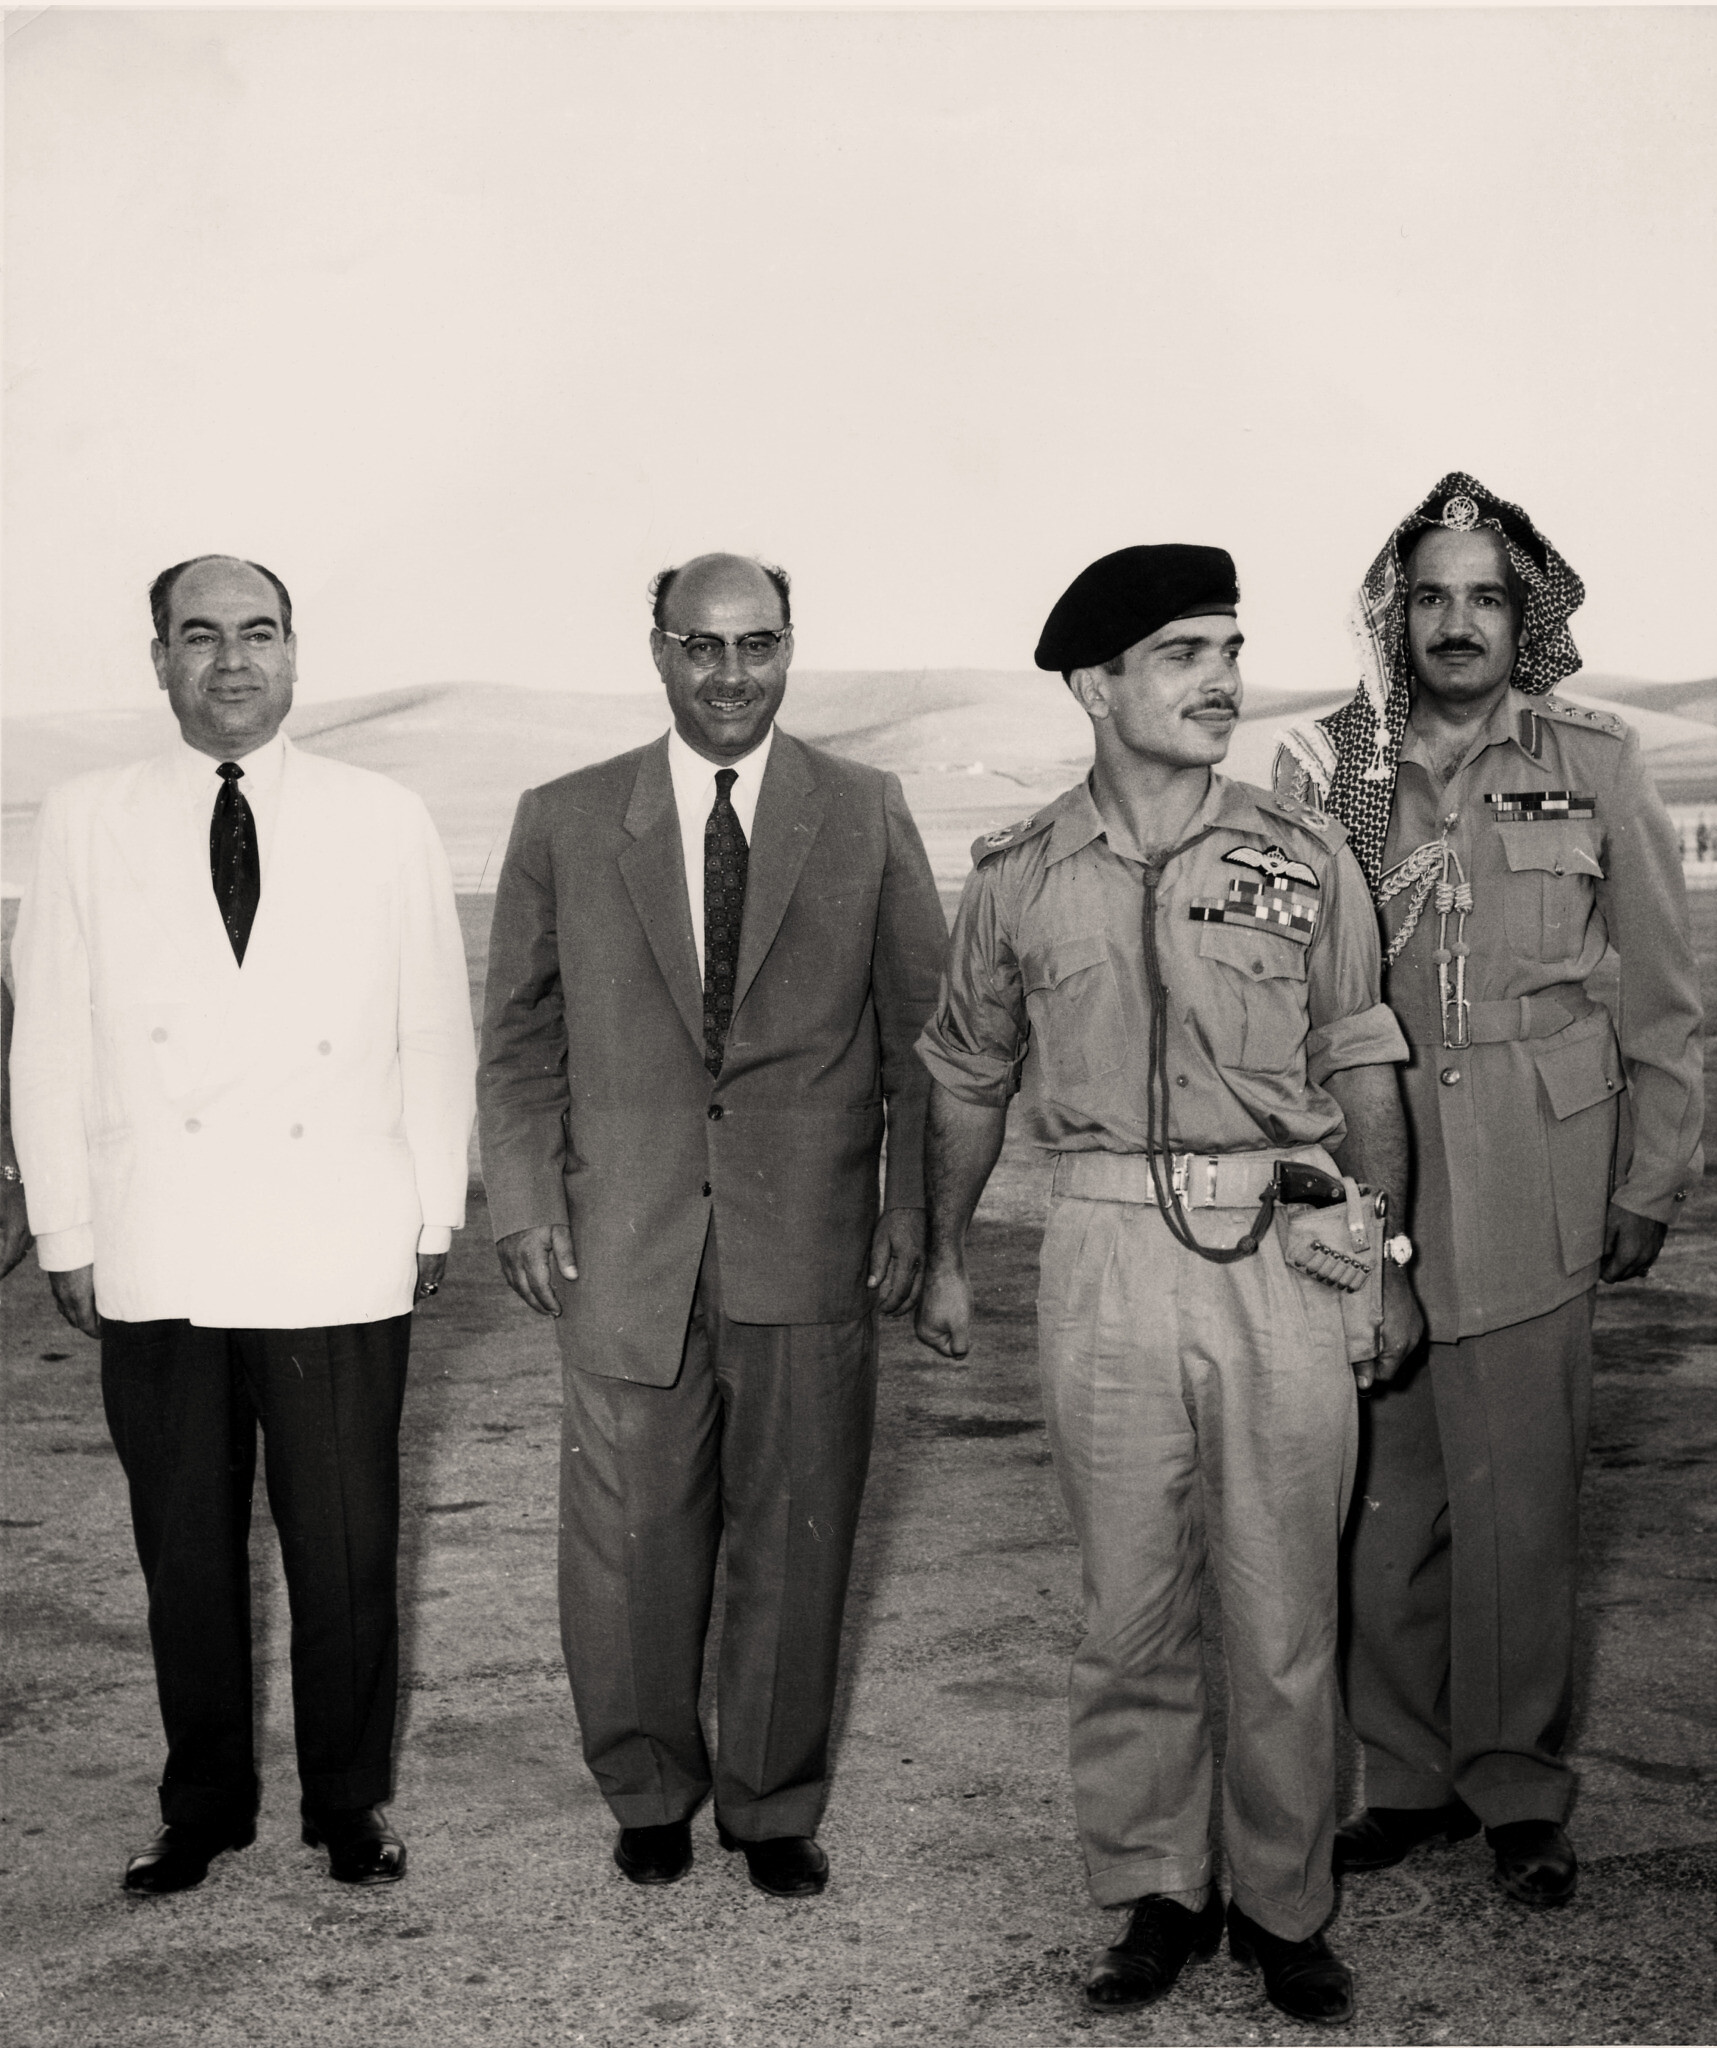 King Hussein of Jordan and his bodyguard (right), together with Dr. Mohsmmed Al-Qutob (second left) and a member of his team, at Jerusalem Airport in the 1960s (Dr. Mohammed Al-Qutob Family Archive / From the exhibition "Gateway to the World: Jerusalem Airport 1948-1967")